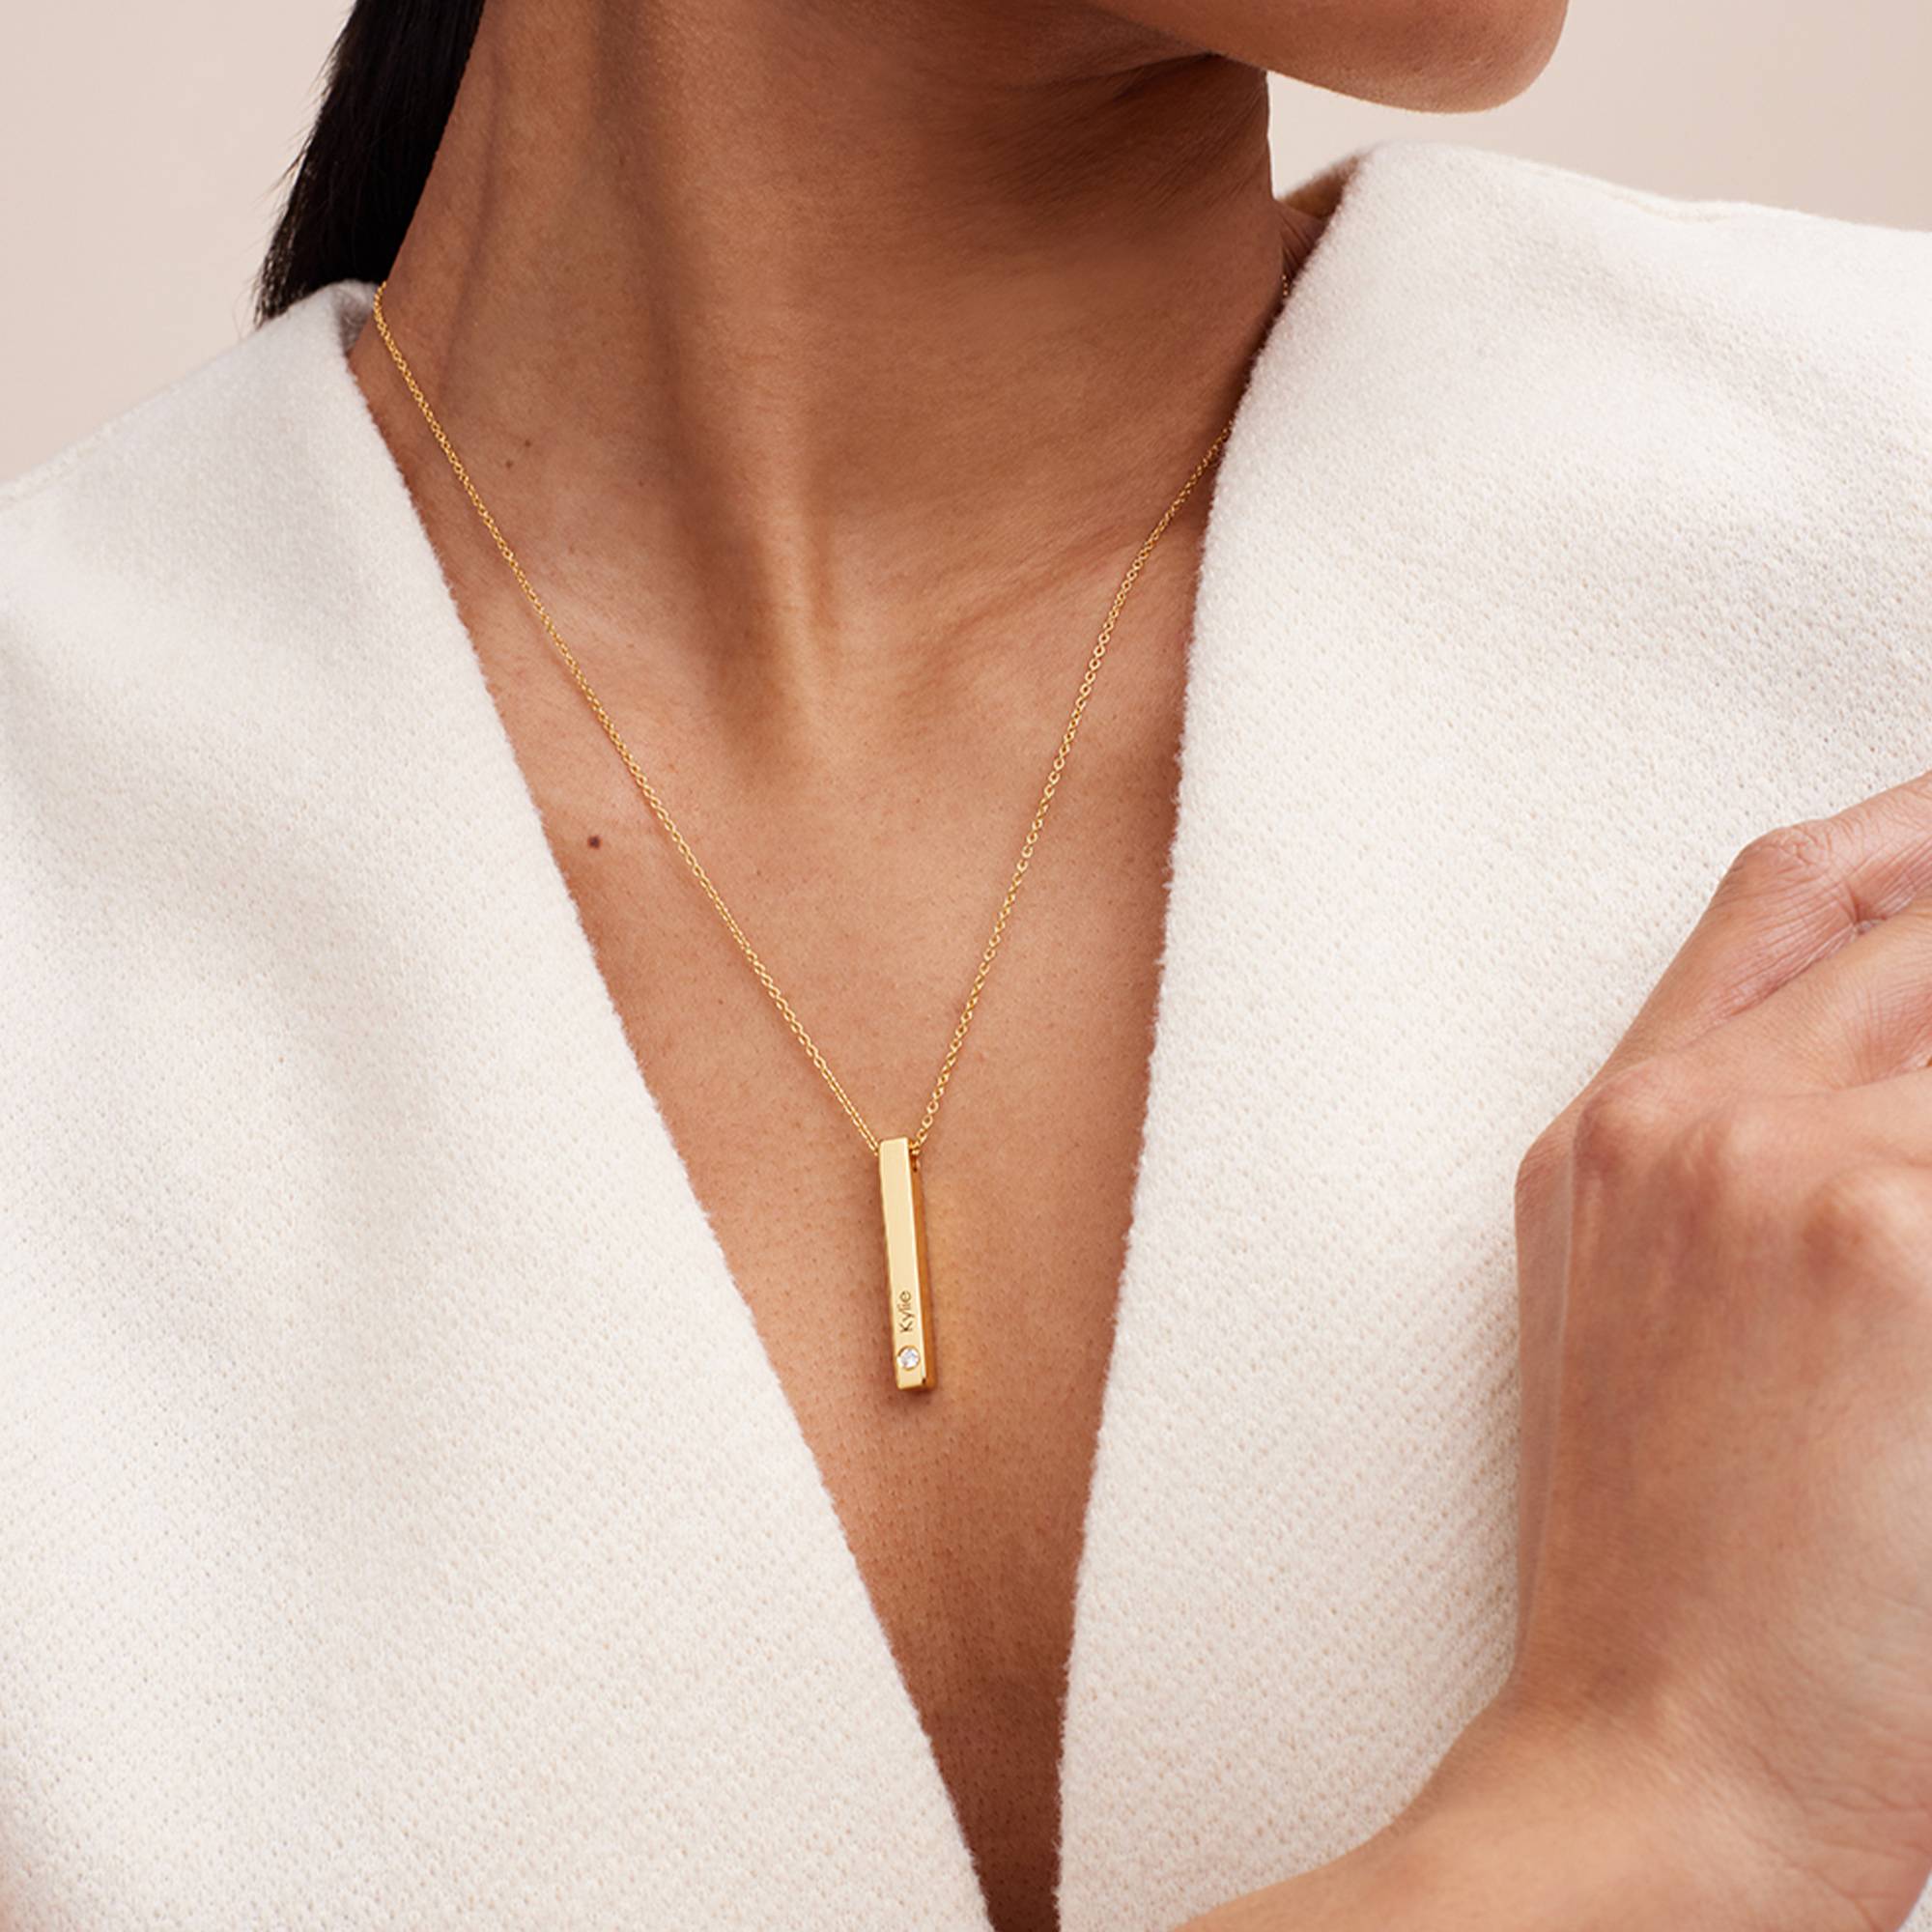 Vertical 3d Bar Necklace with Diamonds in 18k Gold Plating-5 product photo